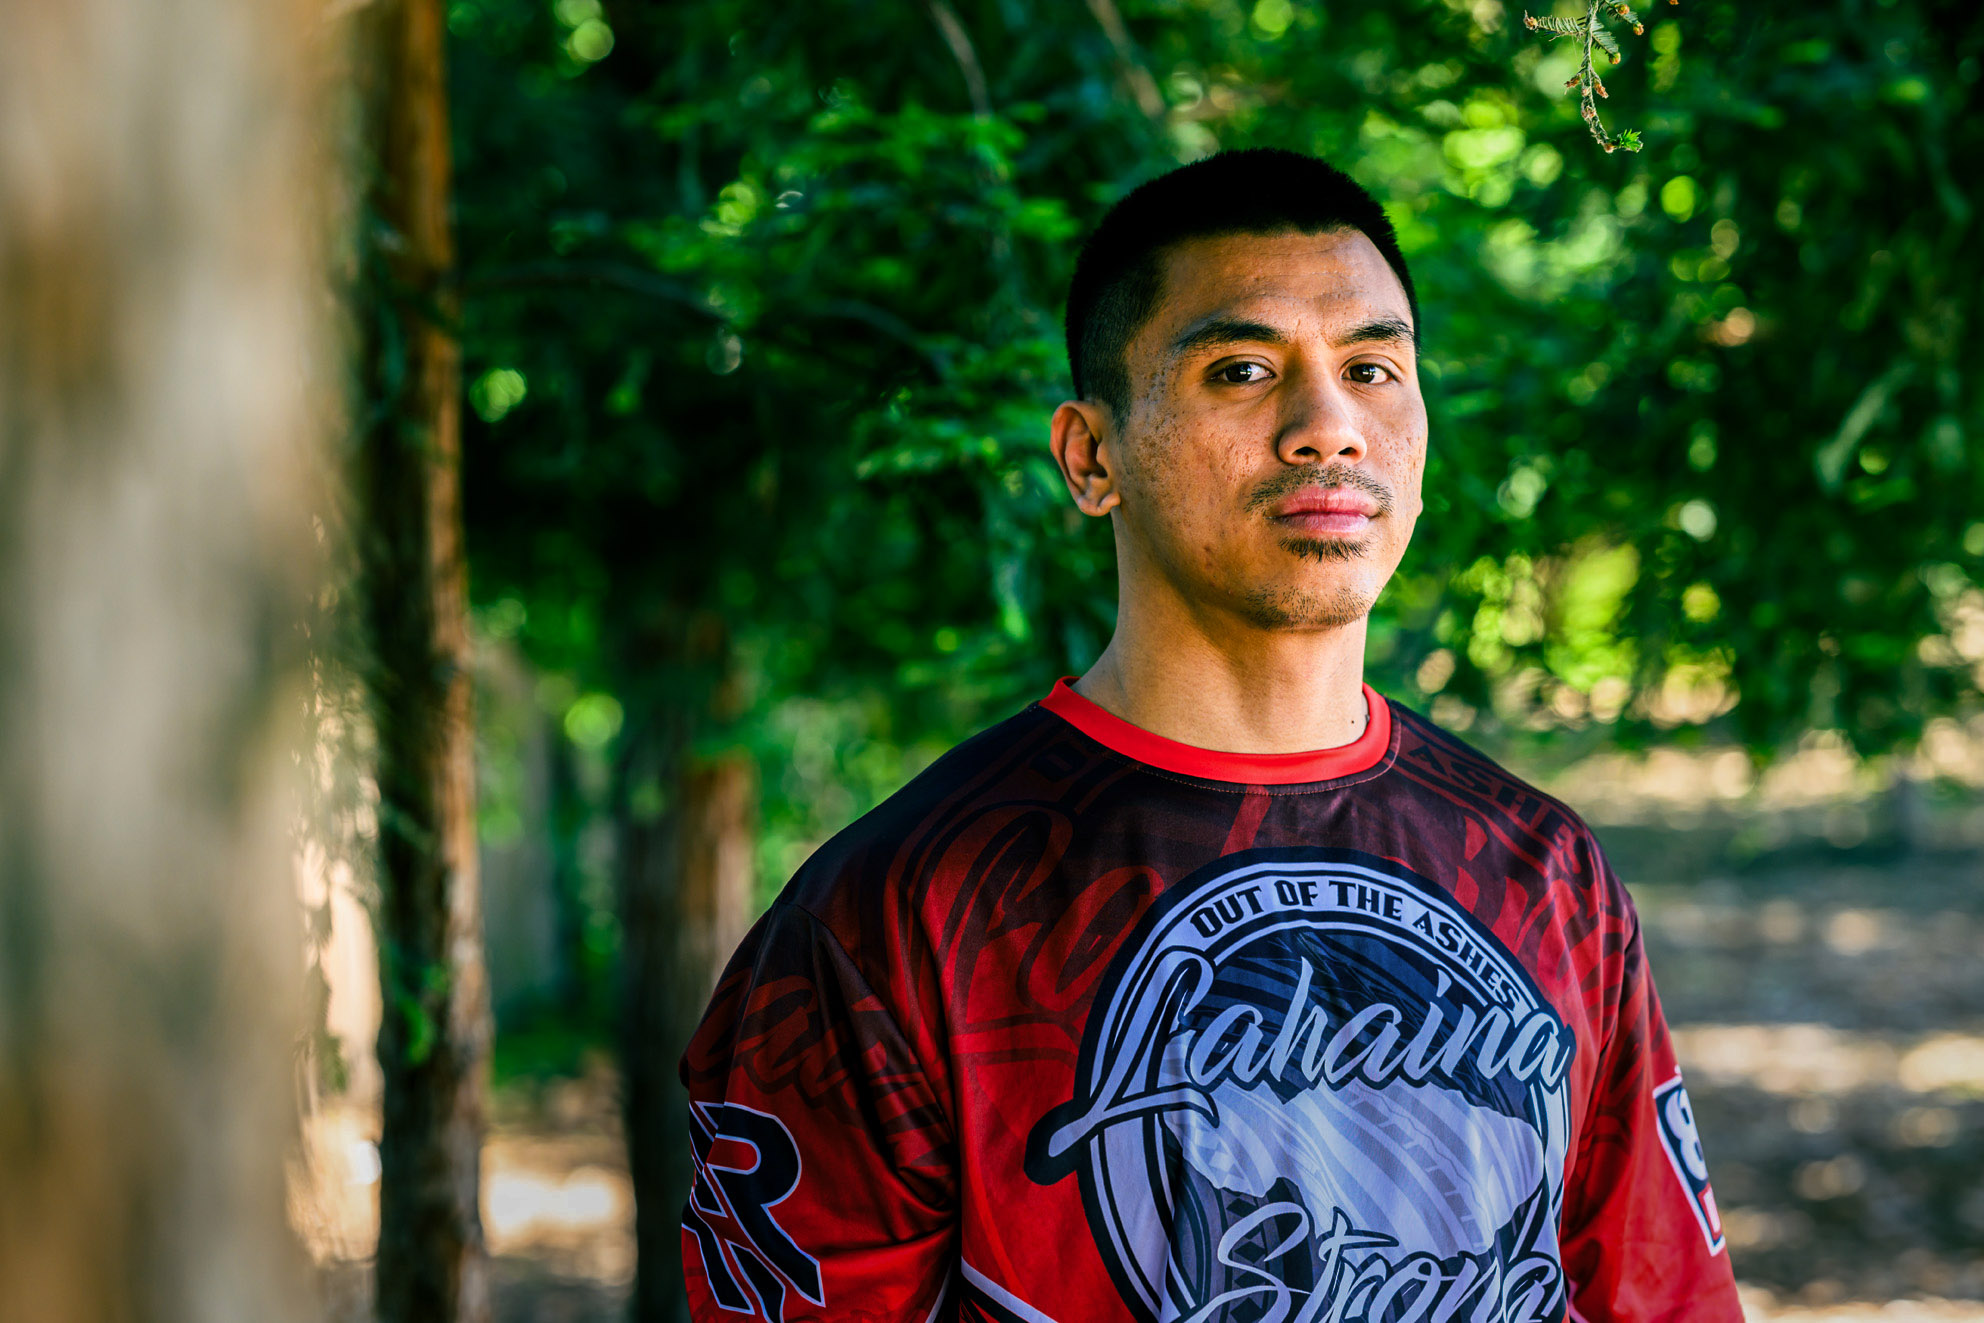 Raven Imperial standing in the shade of trees wearing a "Lahaina Strong; Out of the ashes" shirt